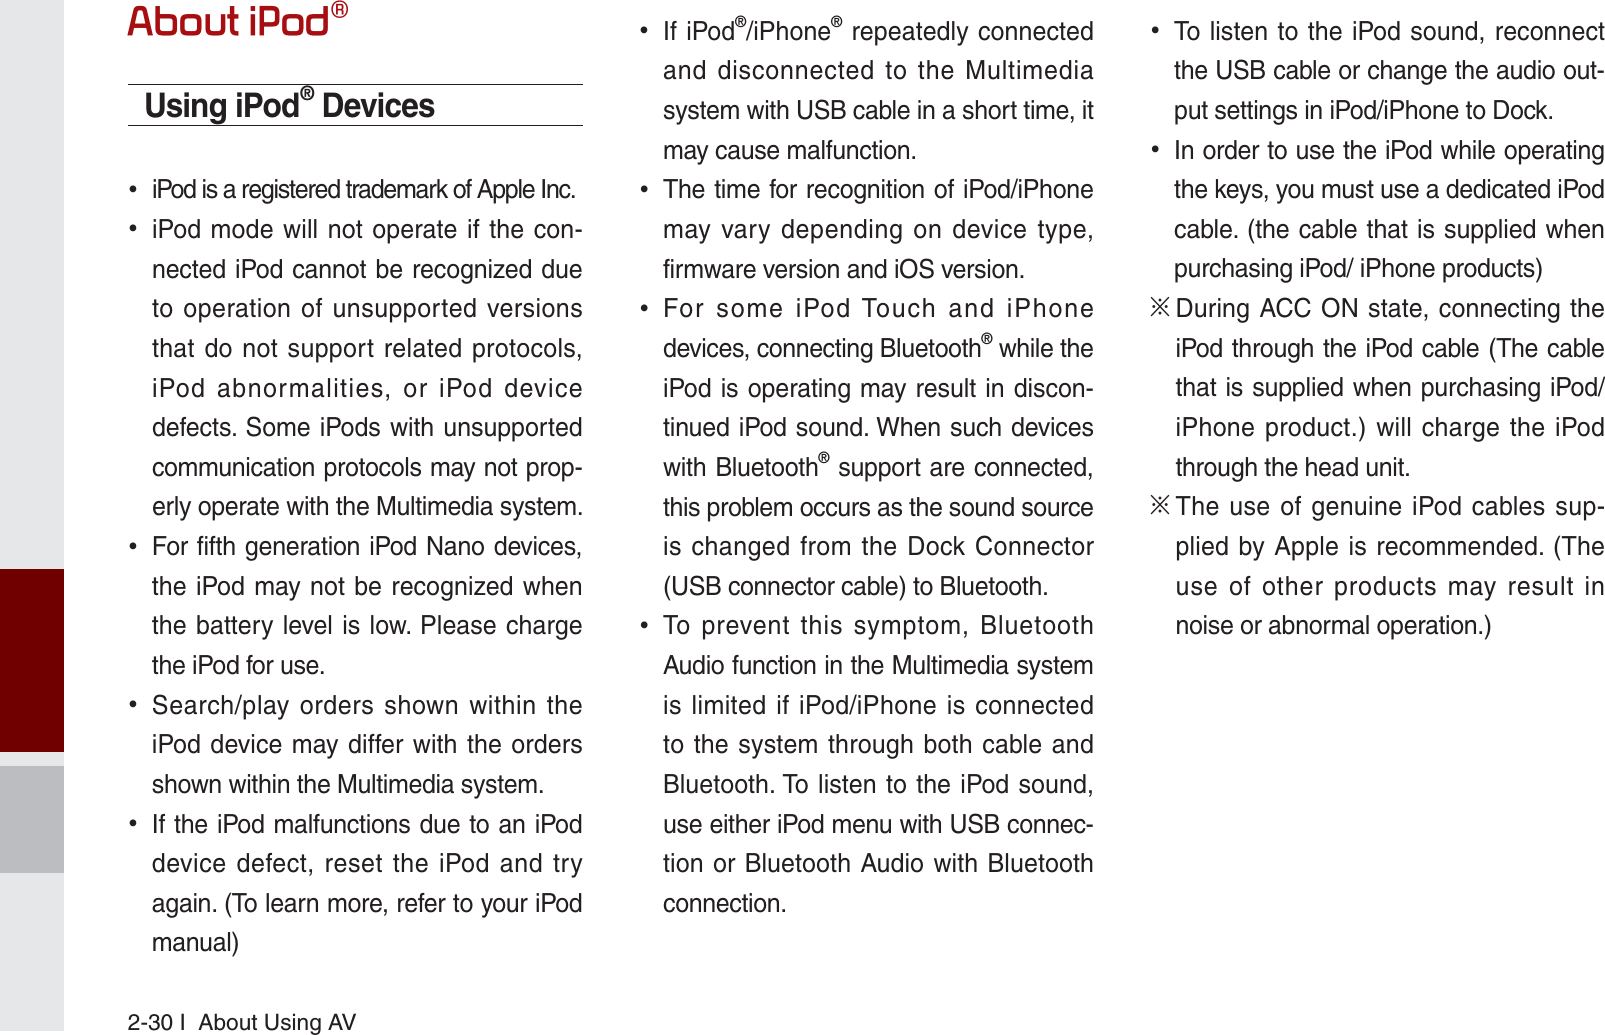 2-30 I  About Using AV$ERXWL3RGpUsing iPod® Devices  iPod is a registered trademark of Apple Inc. iPod mode will not operate if the con-nected iPod cannot be recognized due to operation of unsupported versions that do not support related protocols, iPod abnormalities, or iPod device defects. Some iPods with unsupported communication protocols may not prop-erly operate with the Multimedia system. For fifth generation iPod Nano devices, the iPod may not be recognized when the battery level is low. Please charge the iPod for use.  Search/play orders shown within the iPod device may differ with the orders shown within the Multimedia system. If the iPod malfunctions due to an iPod device defect, reset the iPod and try again. (To learn more, refer to your iPod manual) If iPod®/iPhone® repeatedly connected and disconnected to the Multimedia system with USB cable in a short time, it may cause malfunction.  The time for recognition of iPod/iPhone may vary depending on device type, firmware version and iOS version. For some iPod Touch and iPhone devices, connecting Bluetooth® while the iPod is operating may result in discon-tinued iPod sound. When such devices with Bluetooth® support are connected, this problem occurs as the sound source is changed from the Dock Connector (USB connector cable) to Bluetooth. To prevent this symptom, Bluetooth Audio function in the Multimedia system is limited if iPod/iPhone is connected to the system through both cable and Bluetooth. To listen to the iPod sound, use either iPod menu with USB connec-tion or Bluetooth Audio with Bluetooth connection. To listen to the iPod sound, reconnect the USB cable or change the audio out-put settings in iPod/iPhone to Dock. In order to use the iPod while operating the keys, you must use a dedicated iPod cable. (the cable that is supplied when purchasing iPod/ iPhone products)Ȅ  During ACC ON state, connecting the iPod through the iPod cable (The cable that is supplied when purchasing iPod/iPhone product.) will charge the iPod through the head unit.Ȅ  The use of genuine iPod cables sup-plied by Apple is recommended. (The use of other products may result in noise or abnormal operation.)K_UM_G4.0[EN]AVN PART 2.indd   2-30 2014-10-02   오전 11:34:33